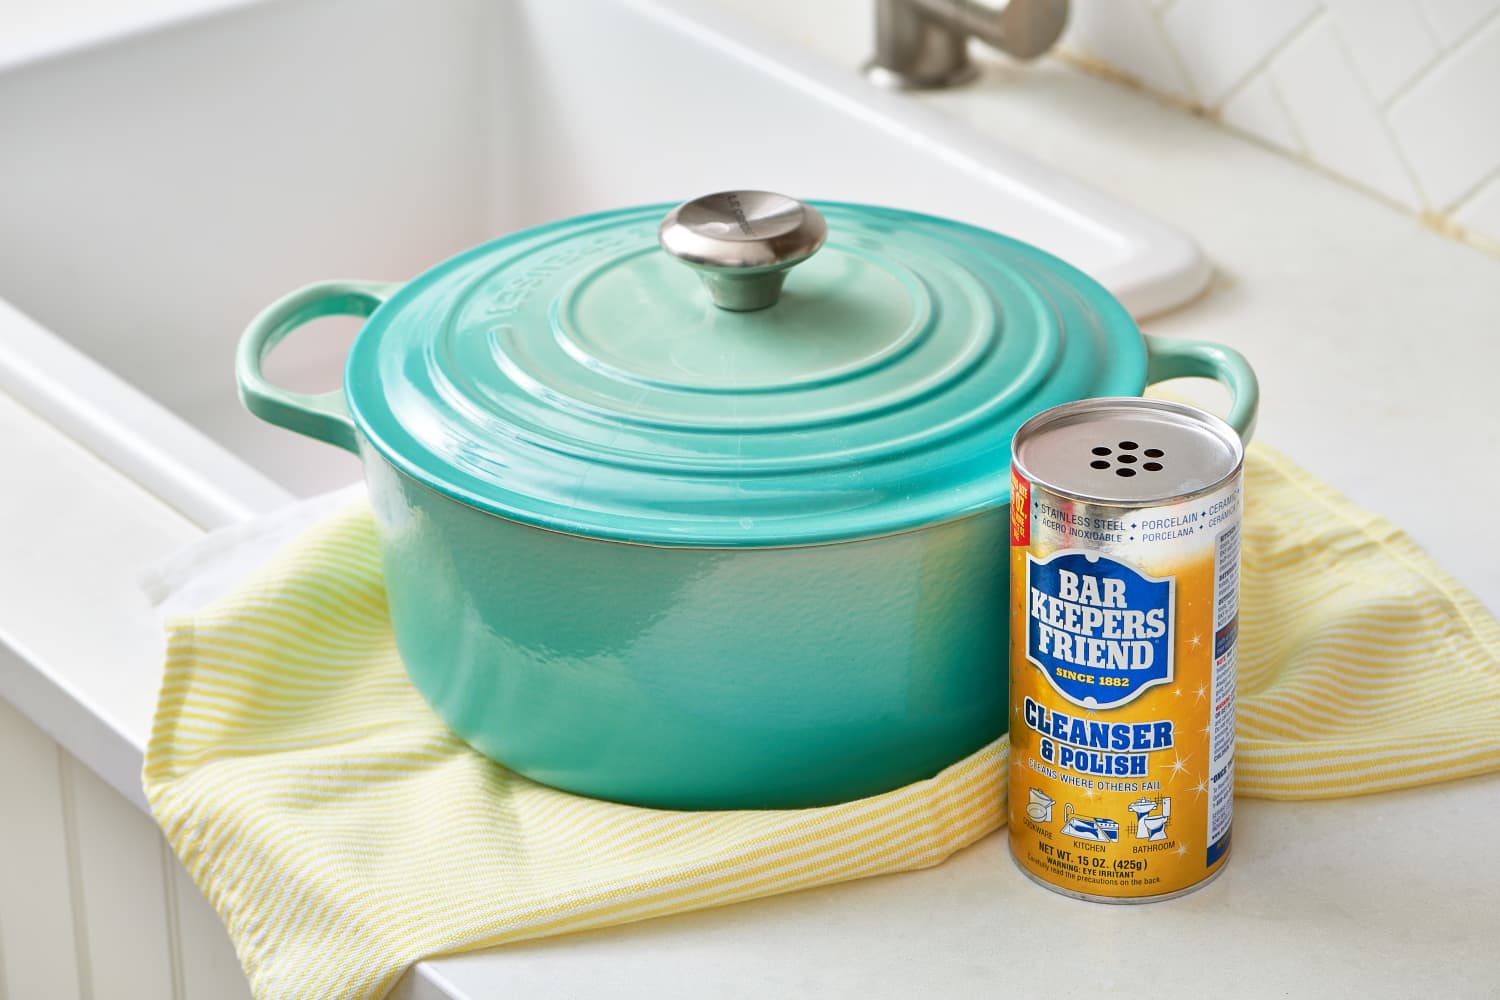 12 Things You Can Do with Bar Keepers Friend - The Kitchn